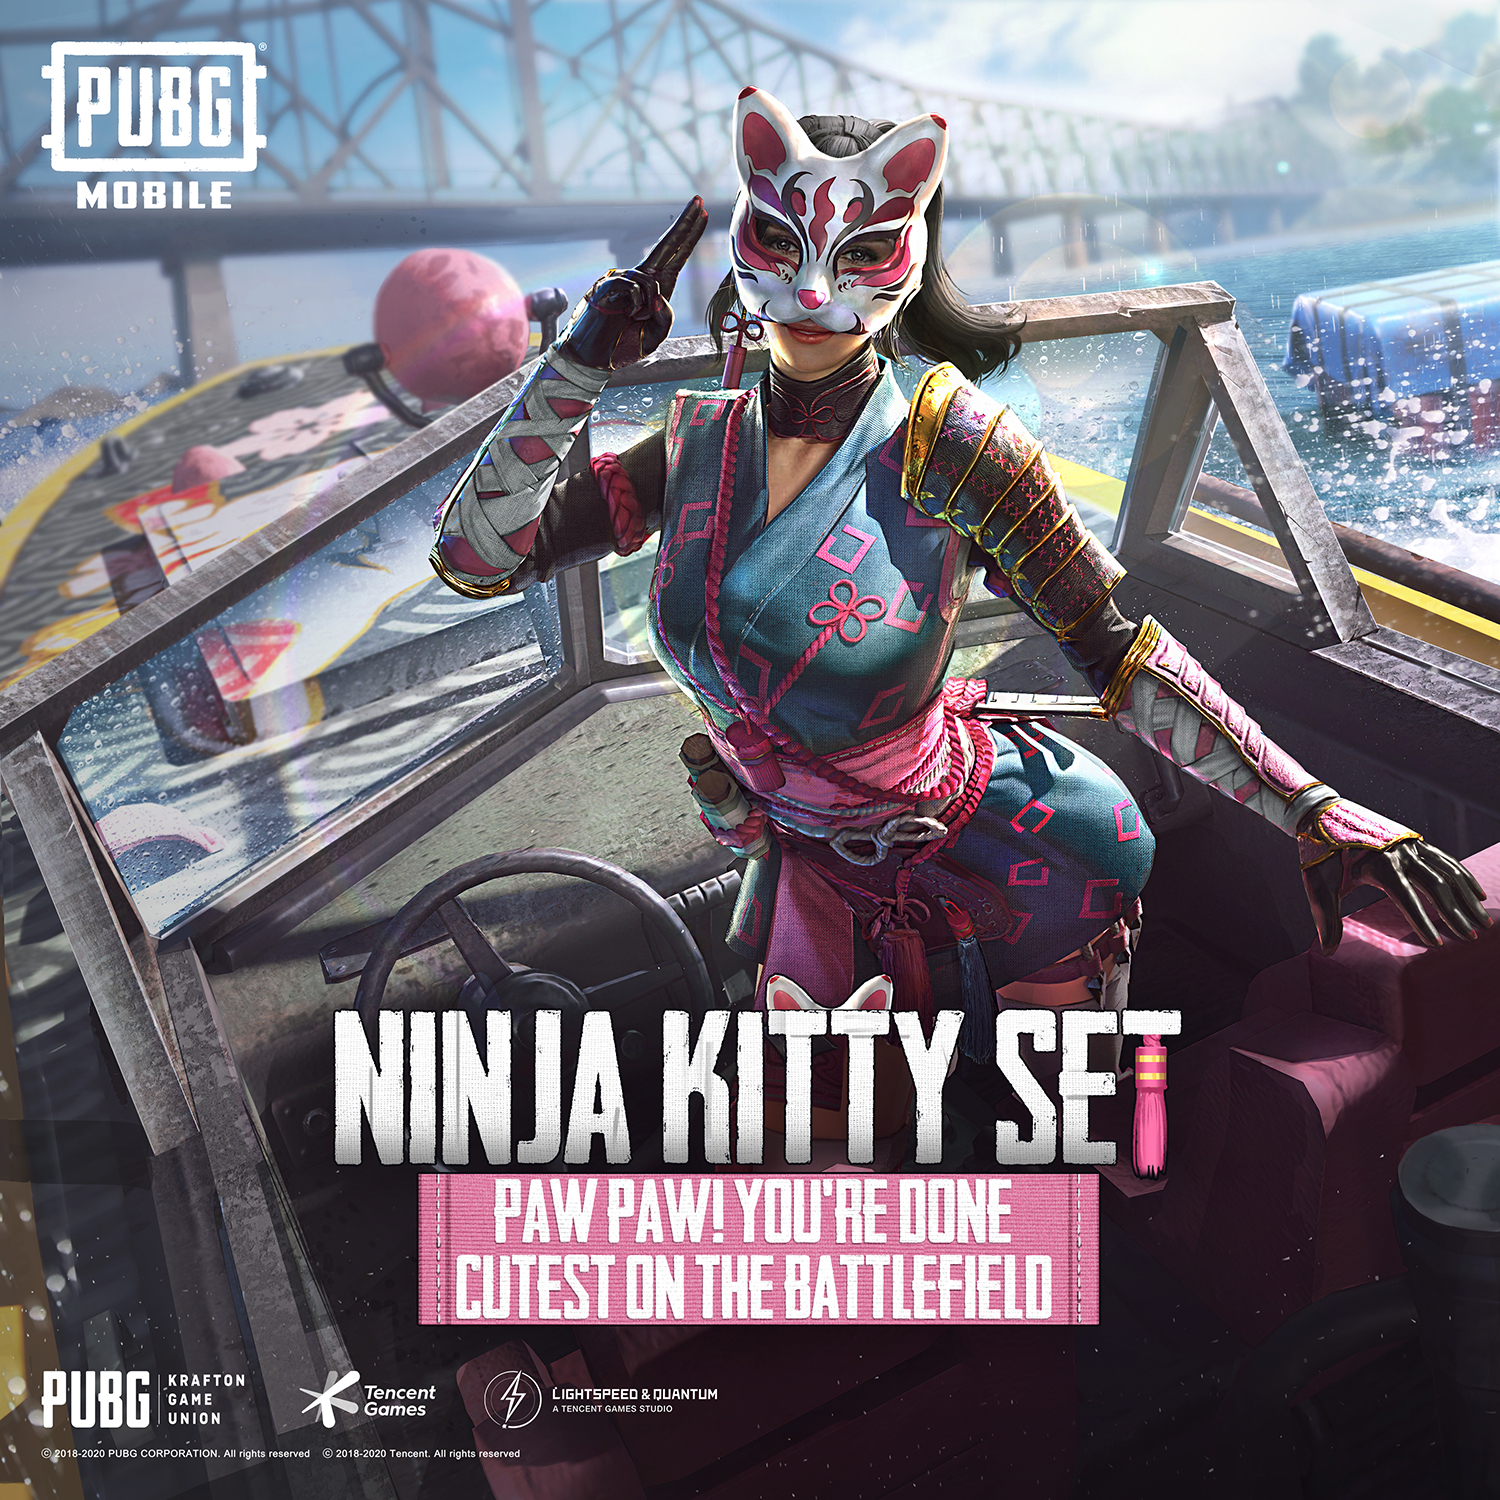 Pubg Mobile Claw Your Way To The Top The Ninja Kitty Set Is Available Now T Co J0p4yjei1j